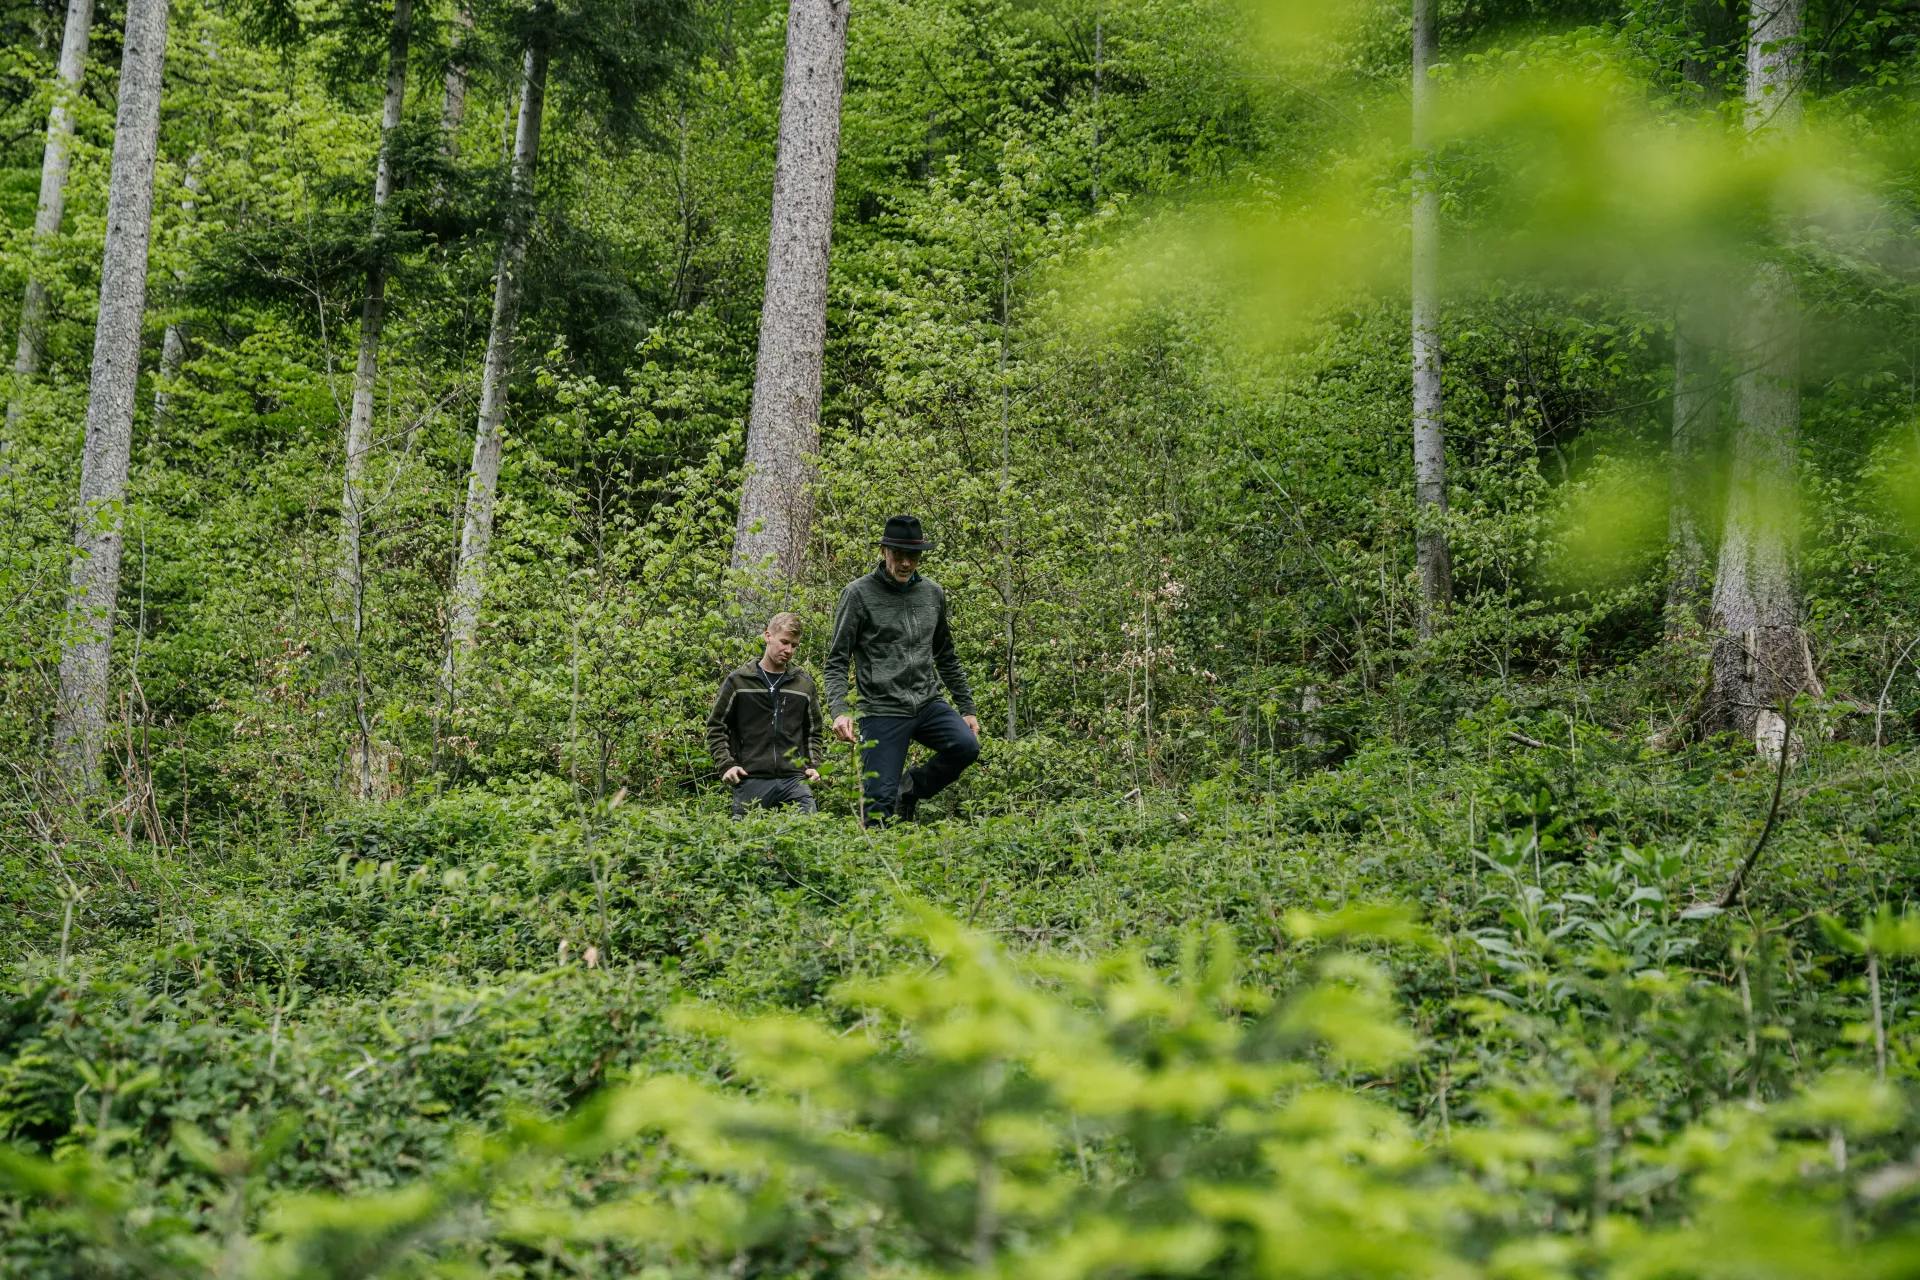 Two persons in a forest